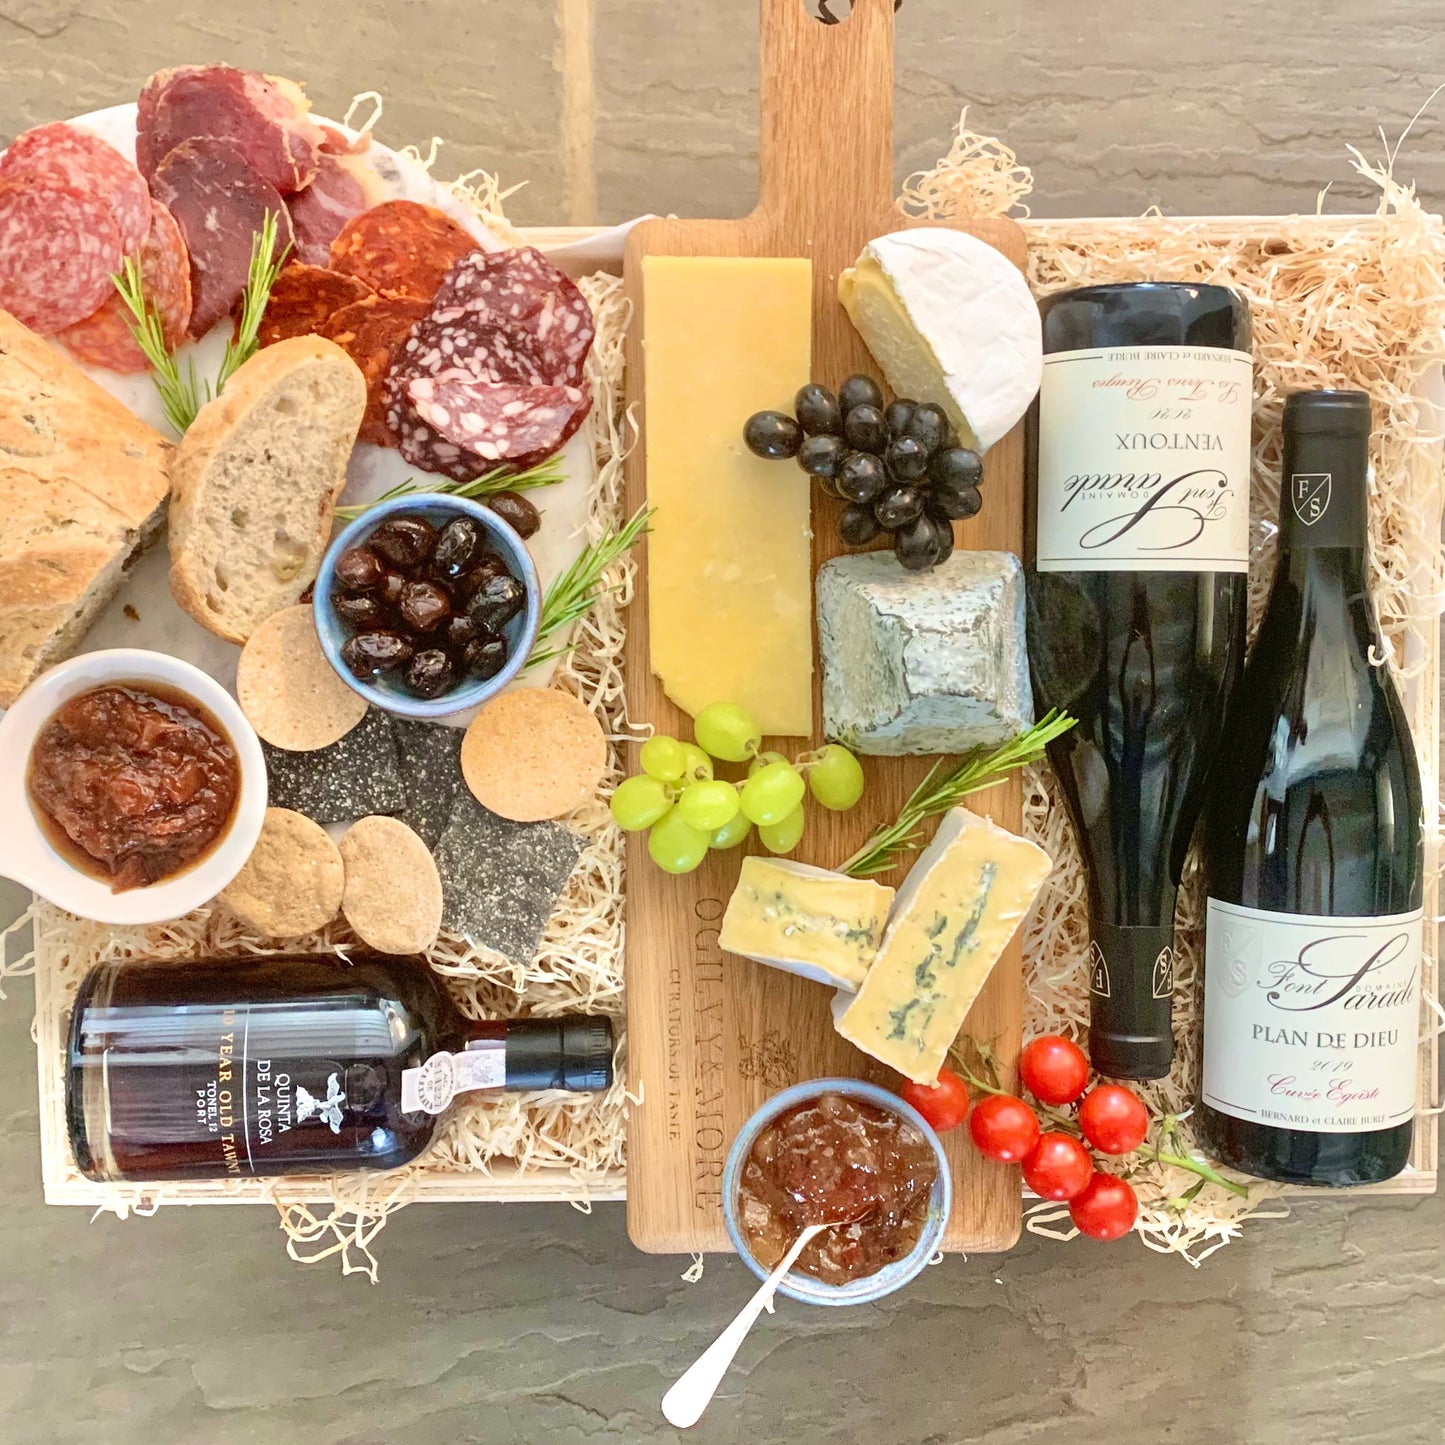 The Highclere - Huge on variety...Cheese, Charcuterie, Red Wine & Port with exclusive O&M Board!